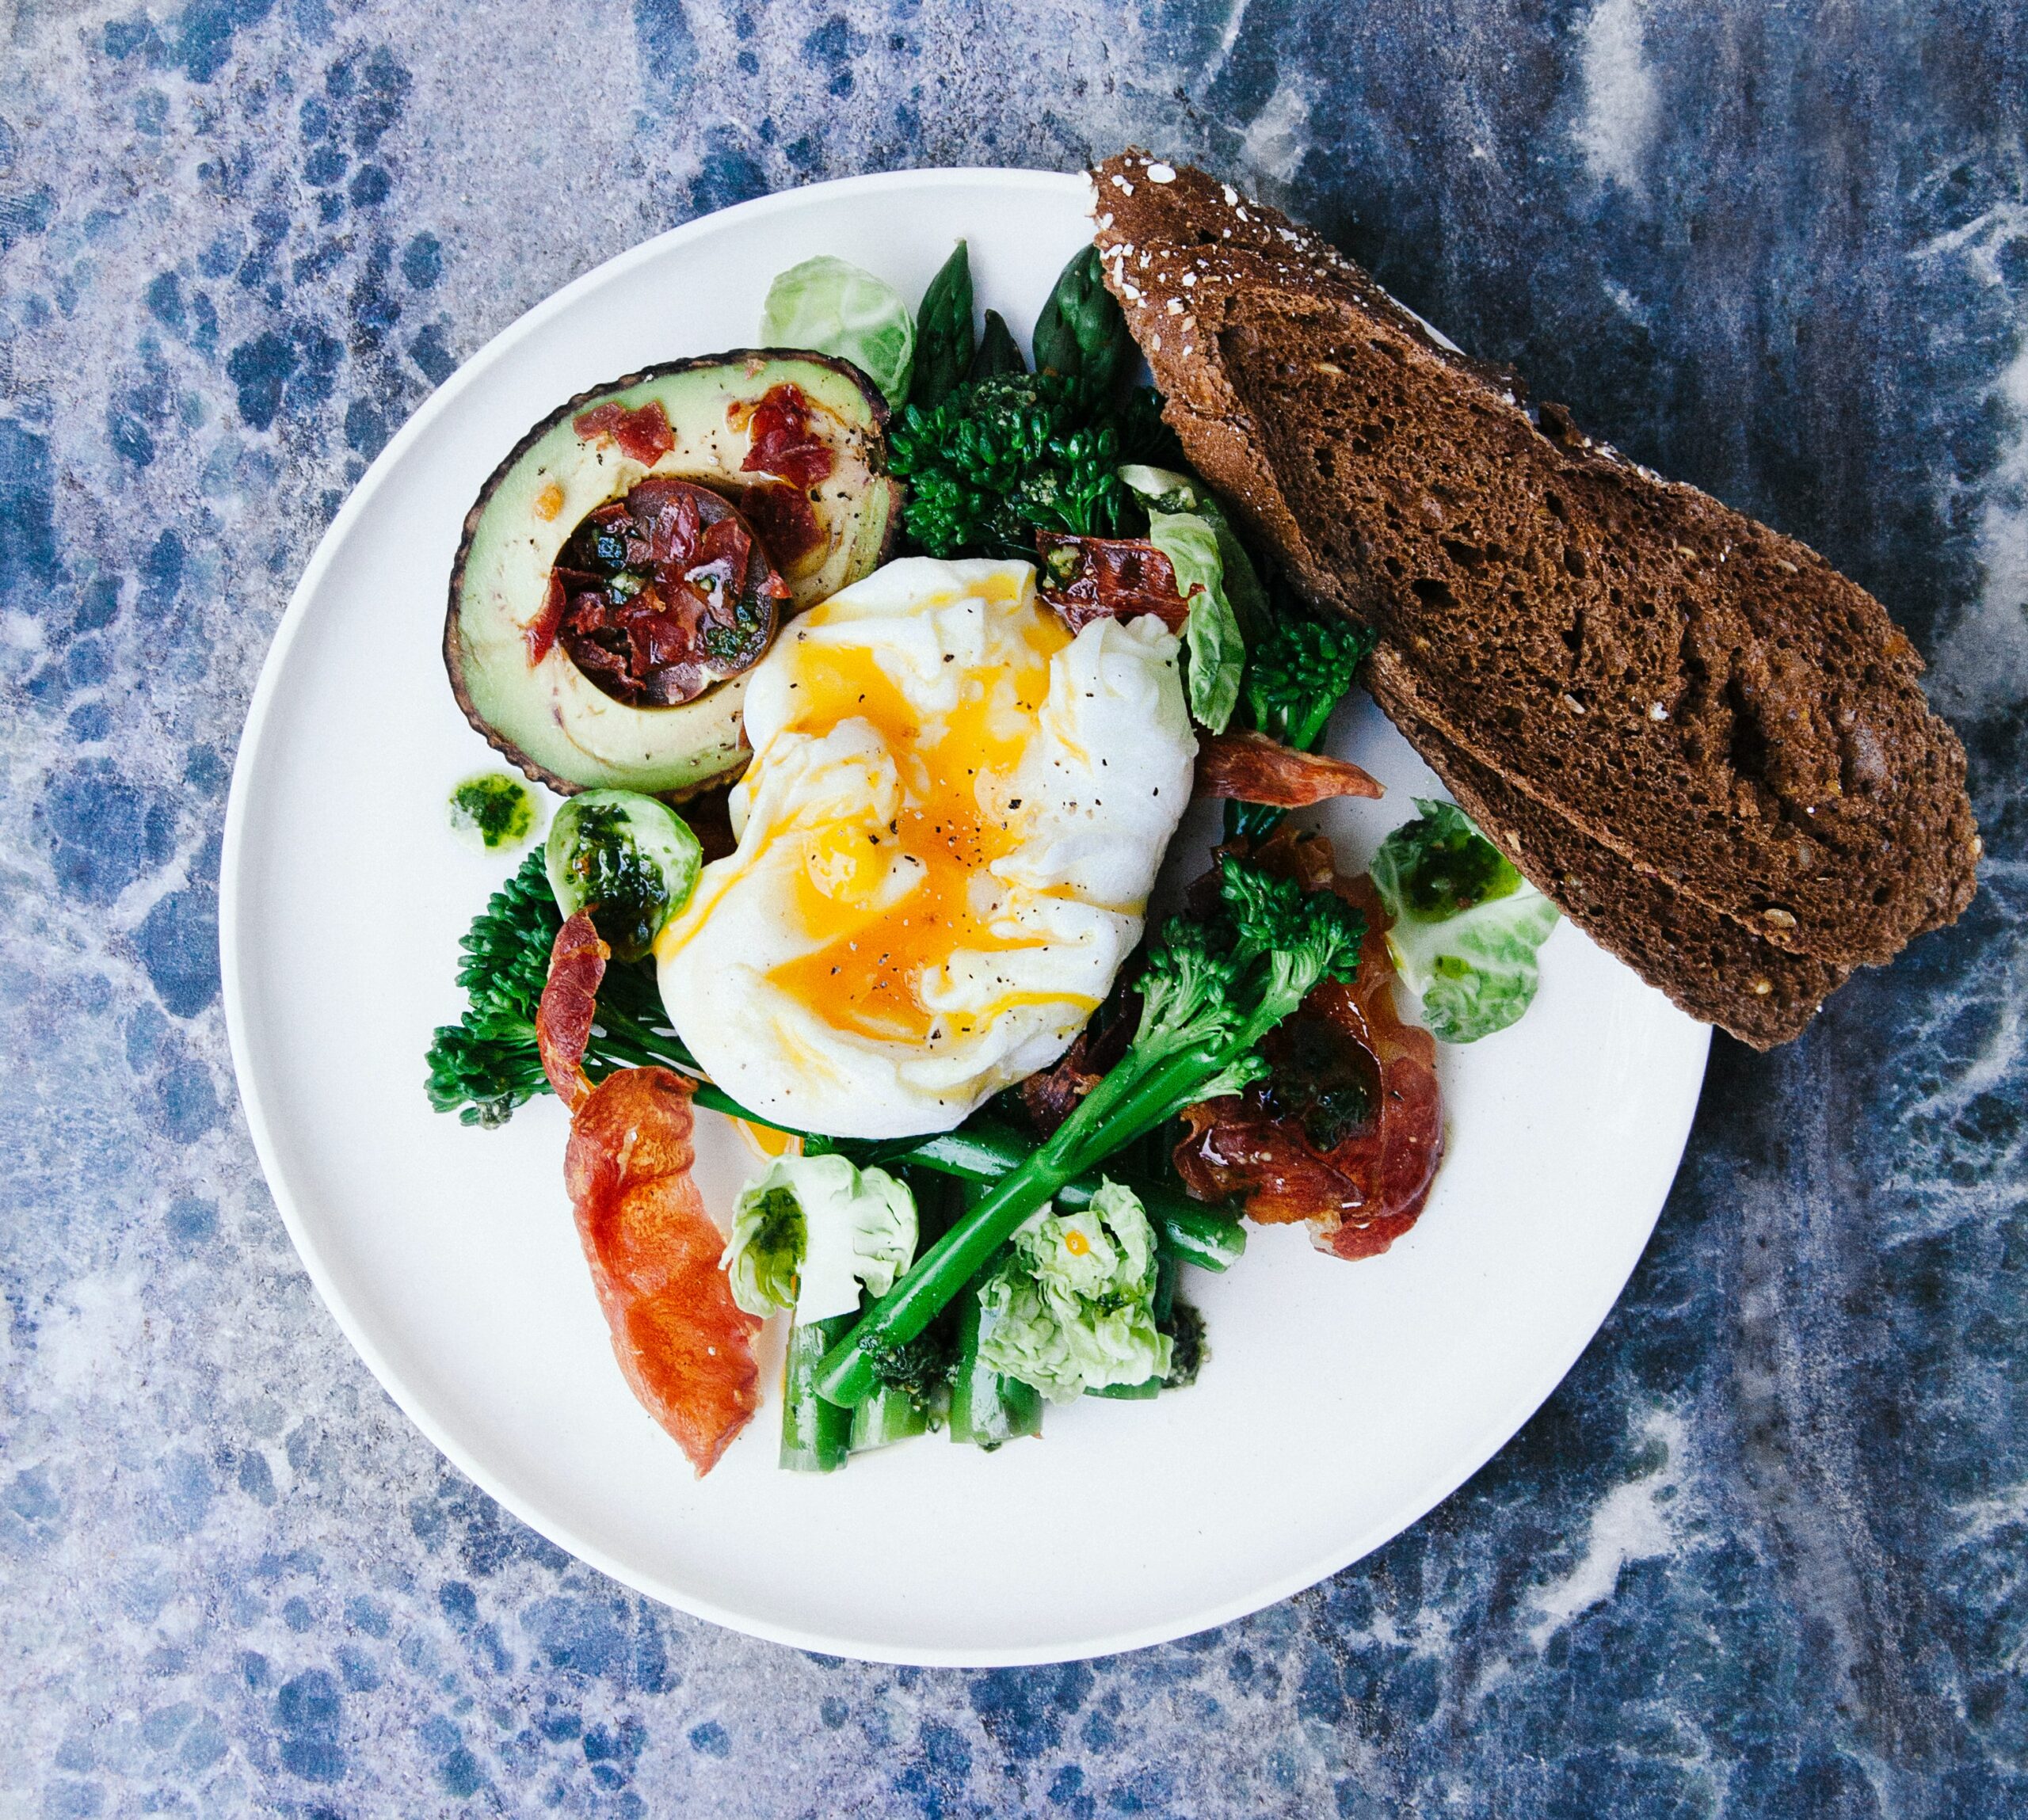 traditional breakfast plate by Chris Ralston on Unsplash